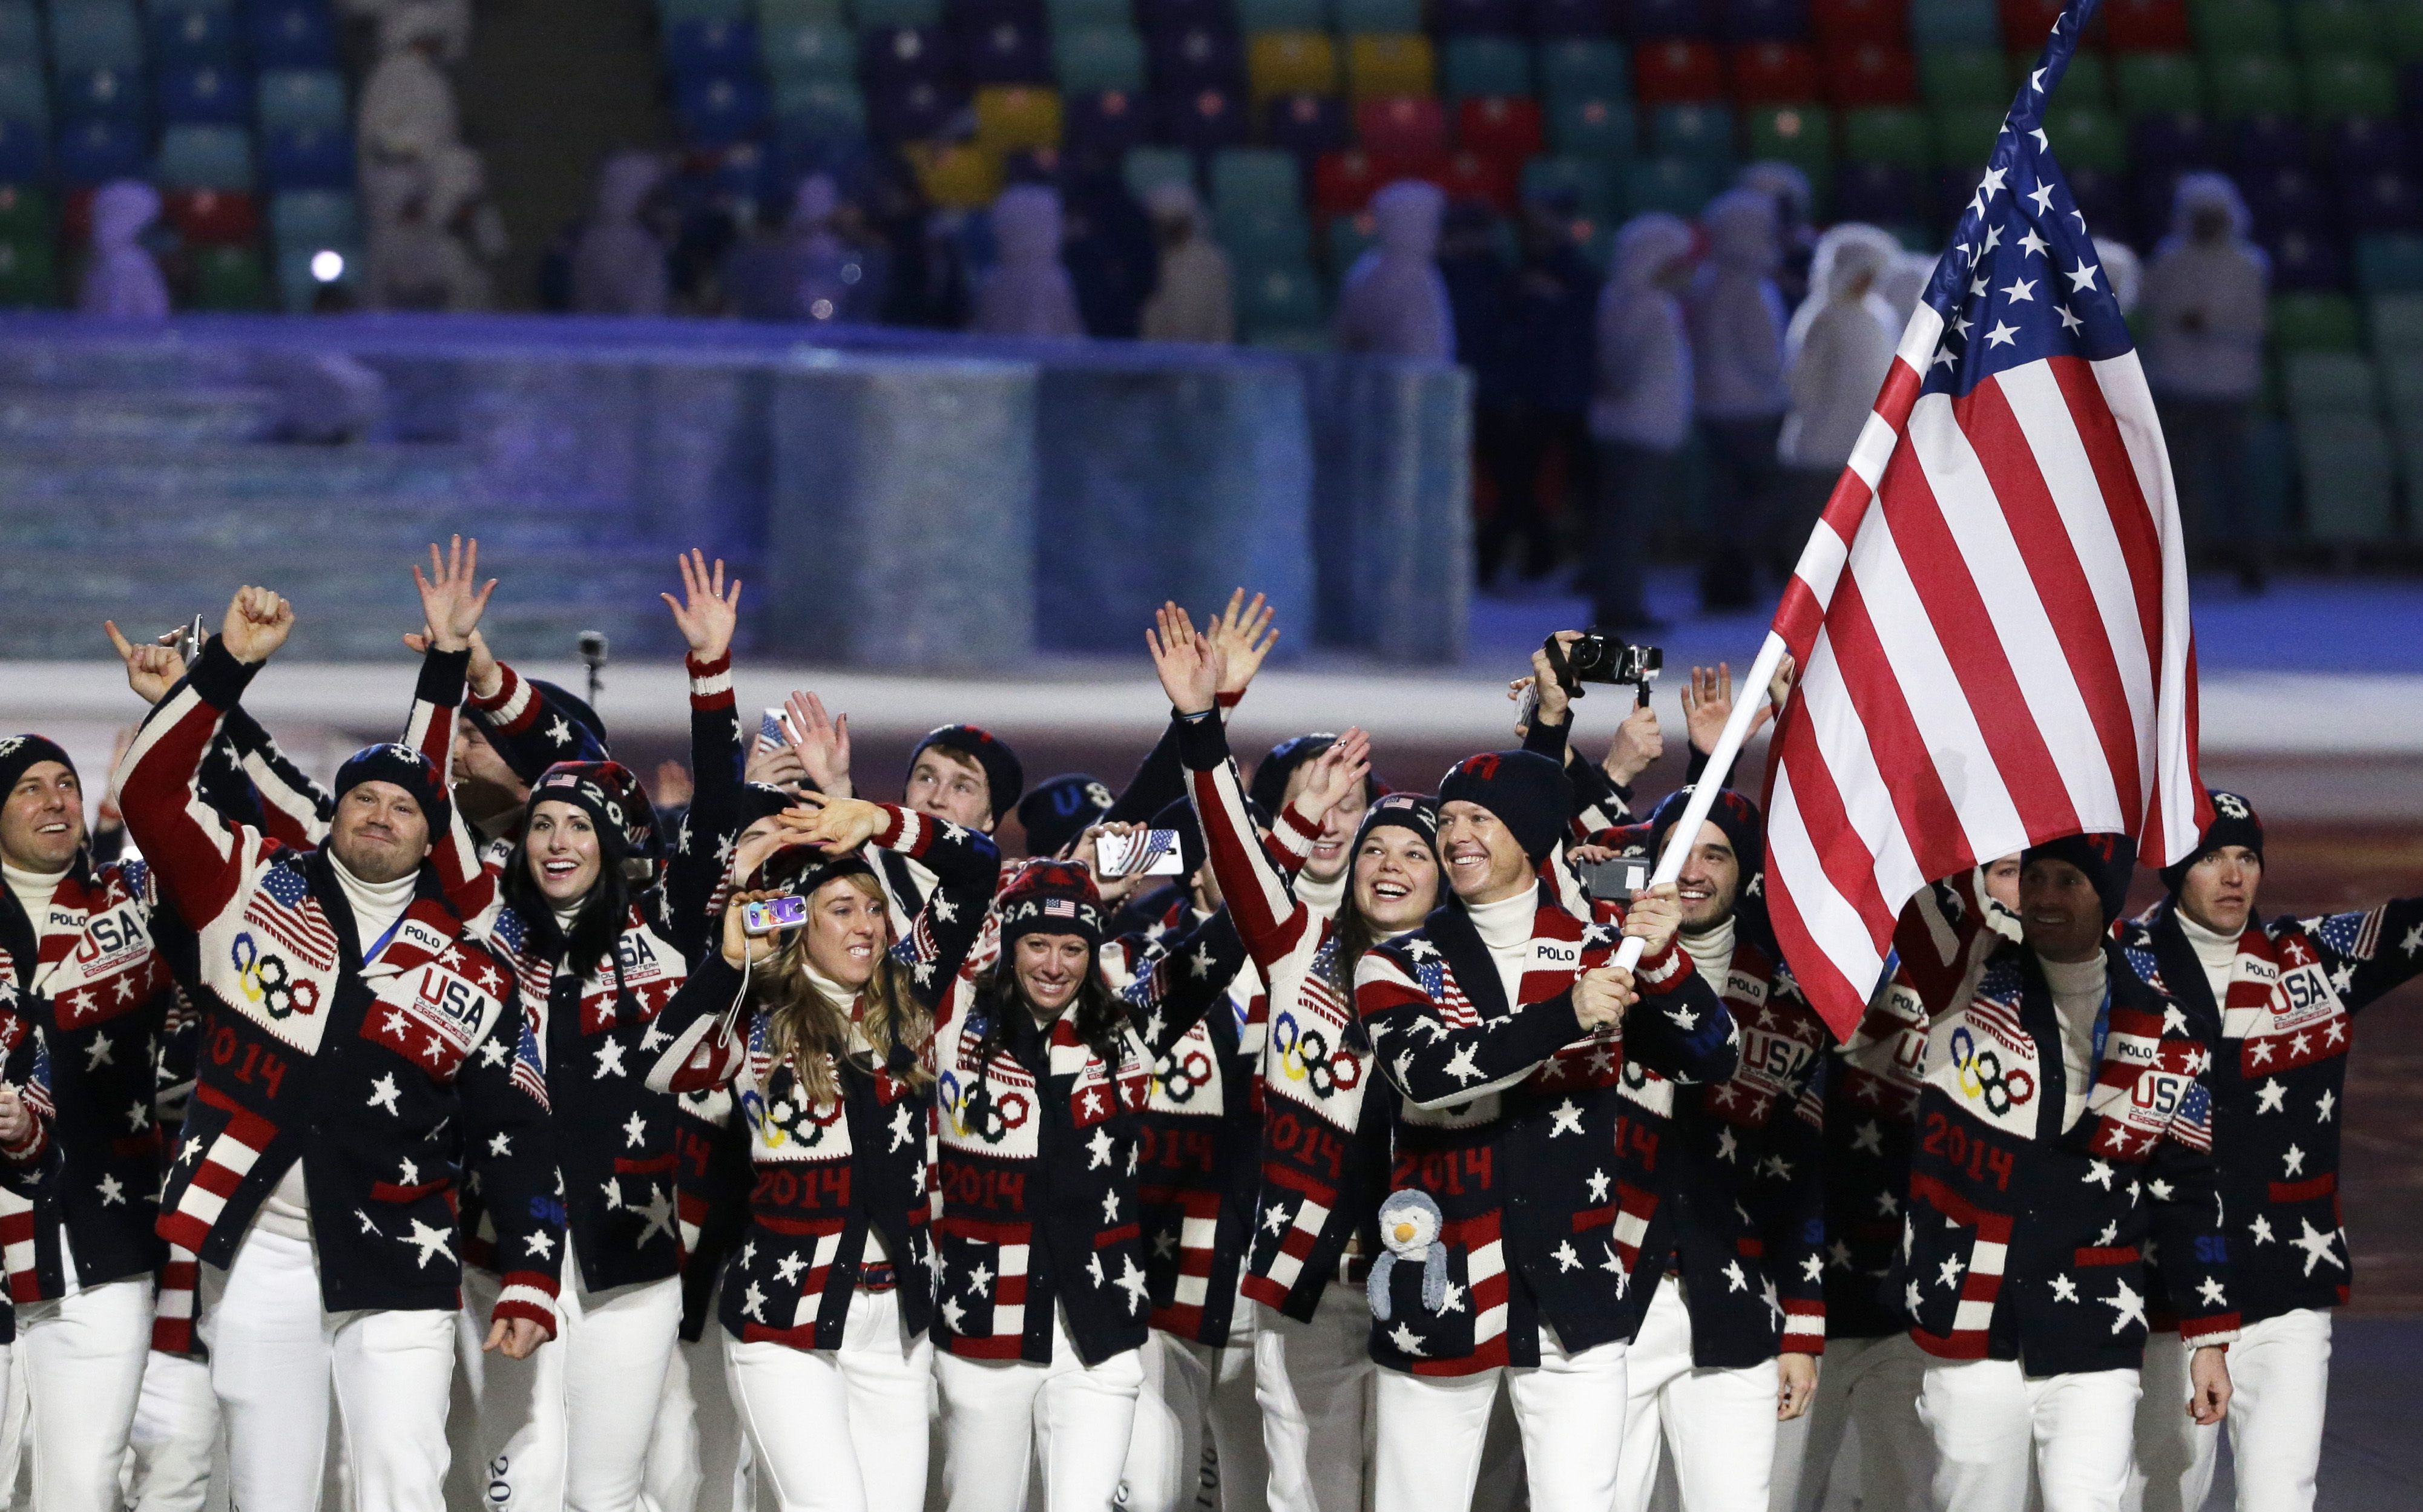 USA Today's Chris Chase thought the United States delegation was an unexpected fashion winner at Opening Ceremony to the 2014 Winter Olympics. (AP)